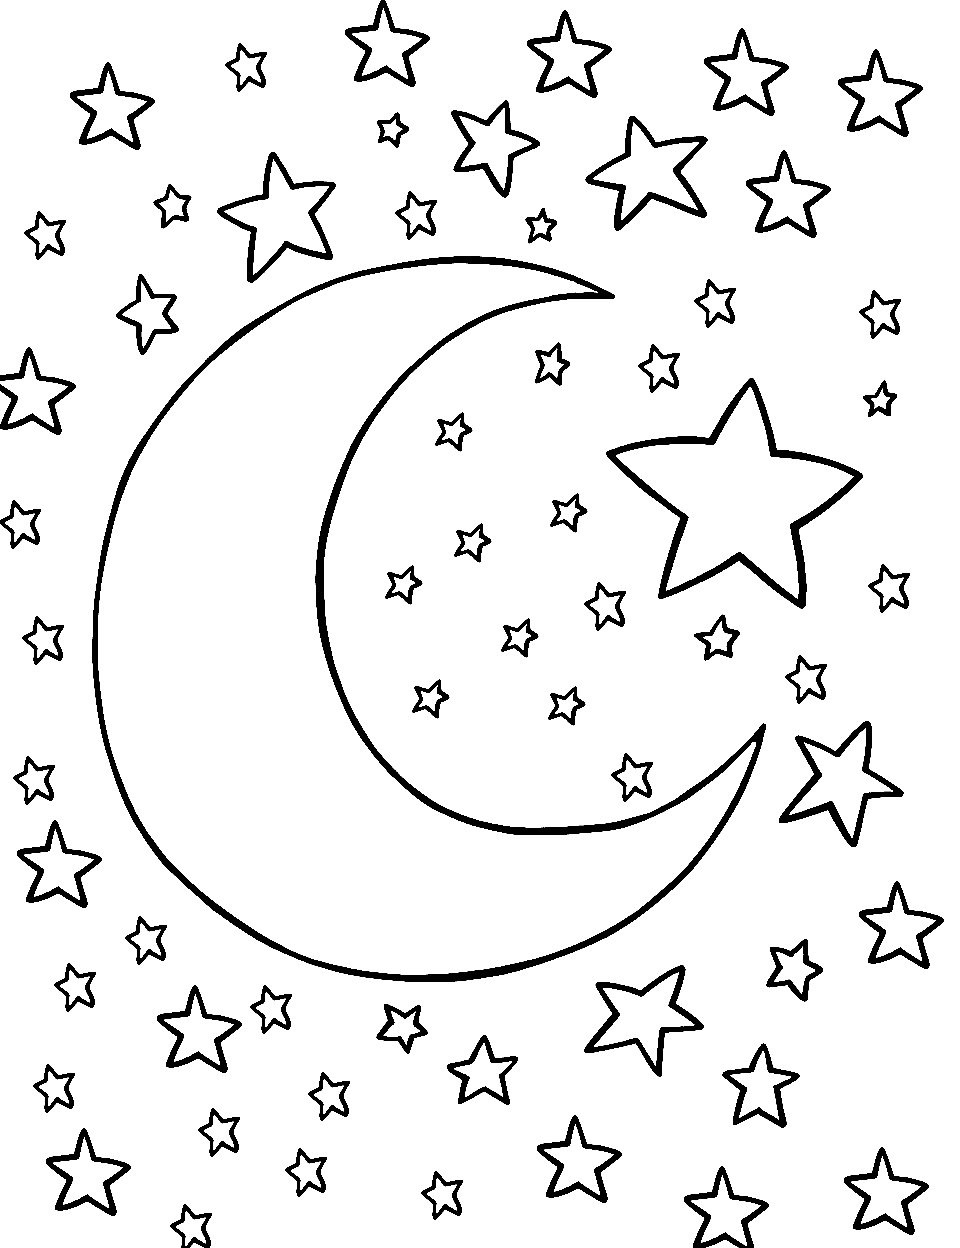 Moonlight Magic Coloring Page - A crescent moon with stars twinkling around in outer space.